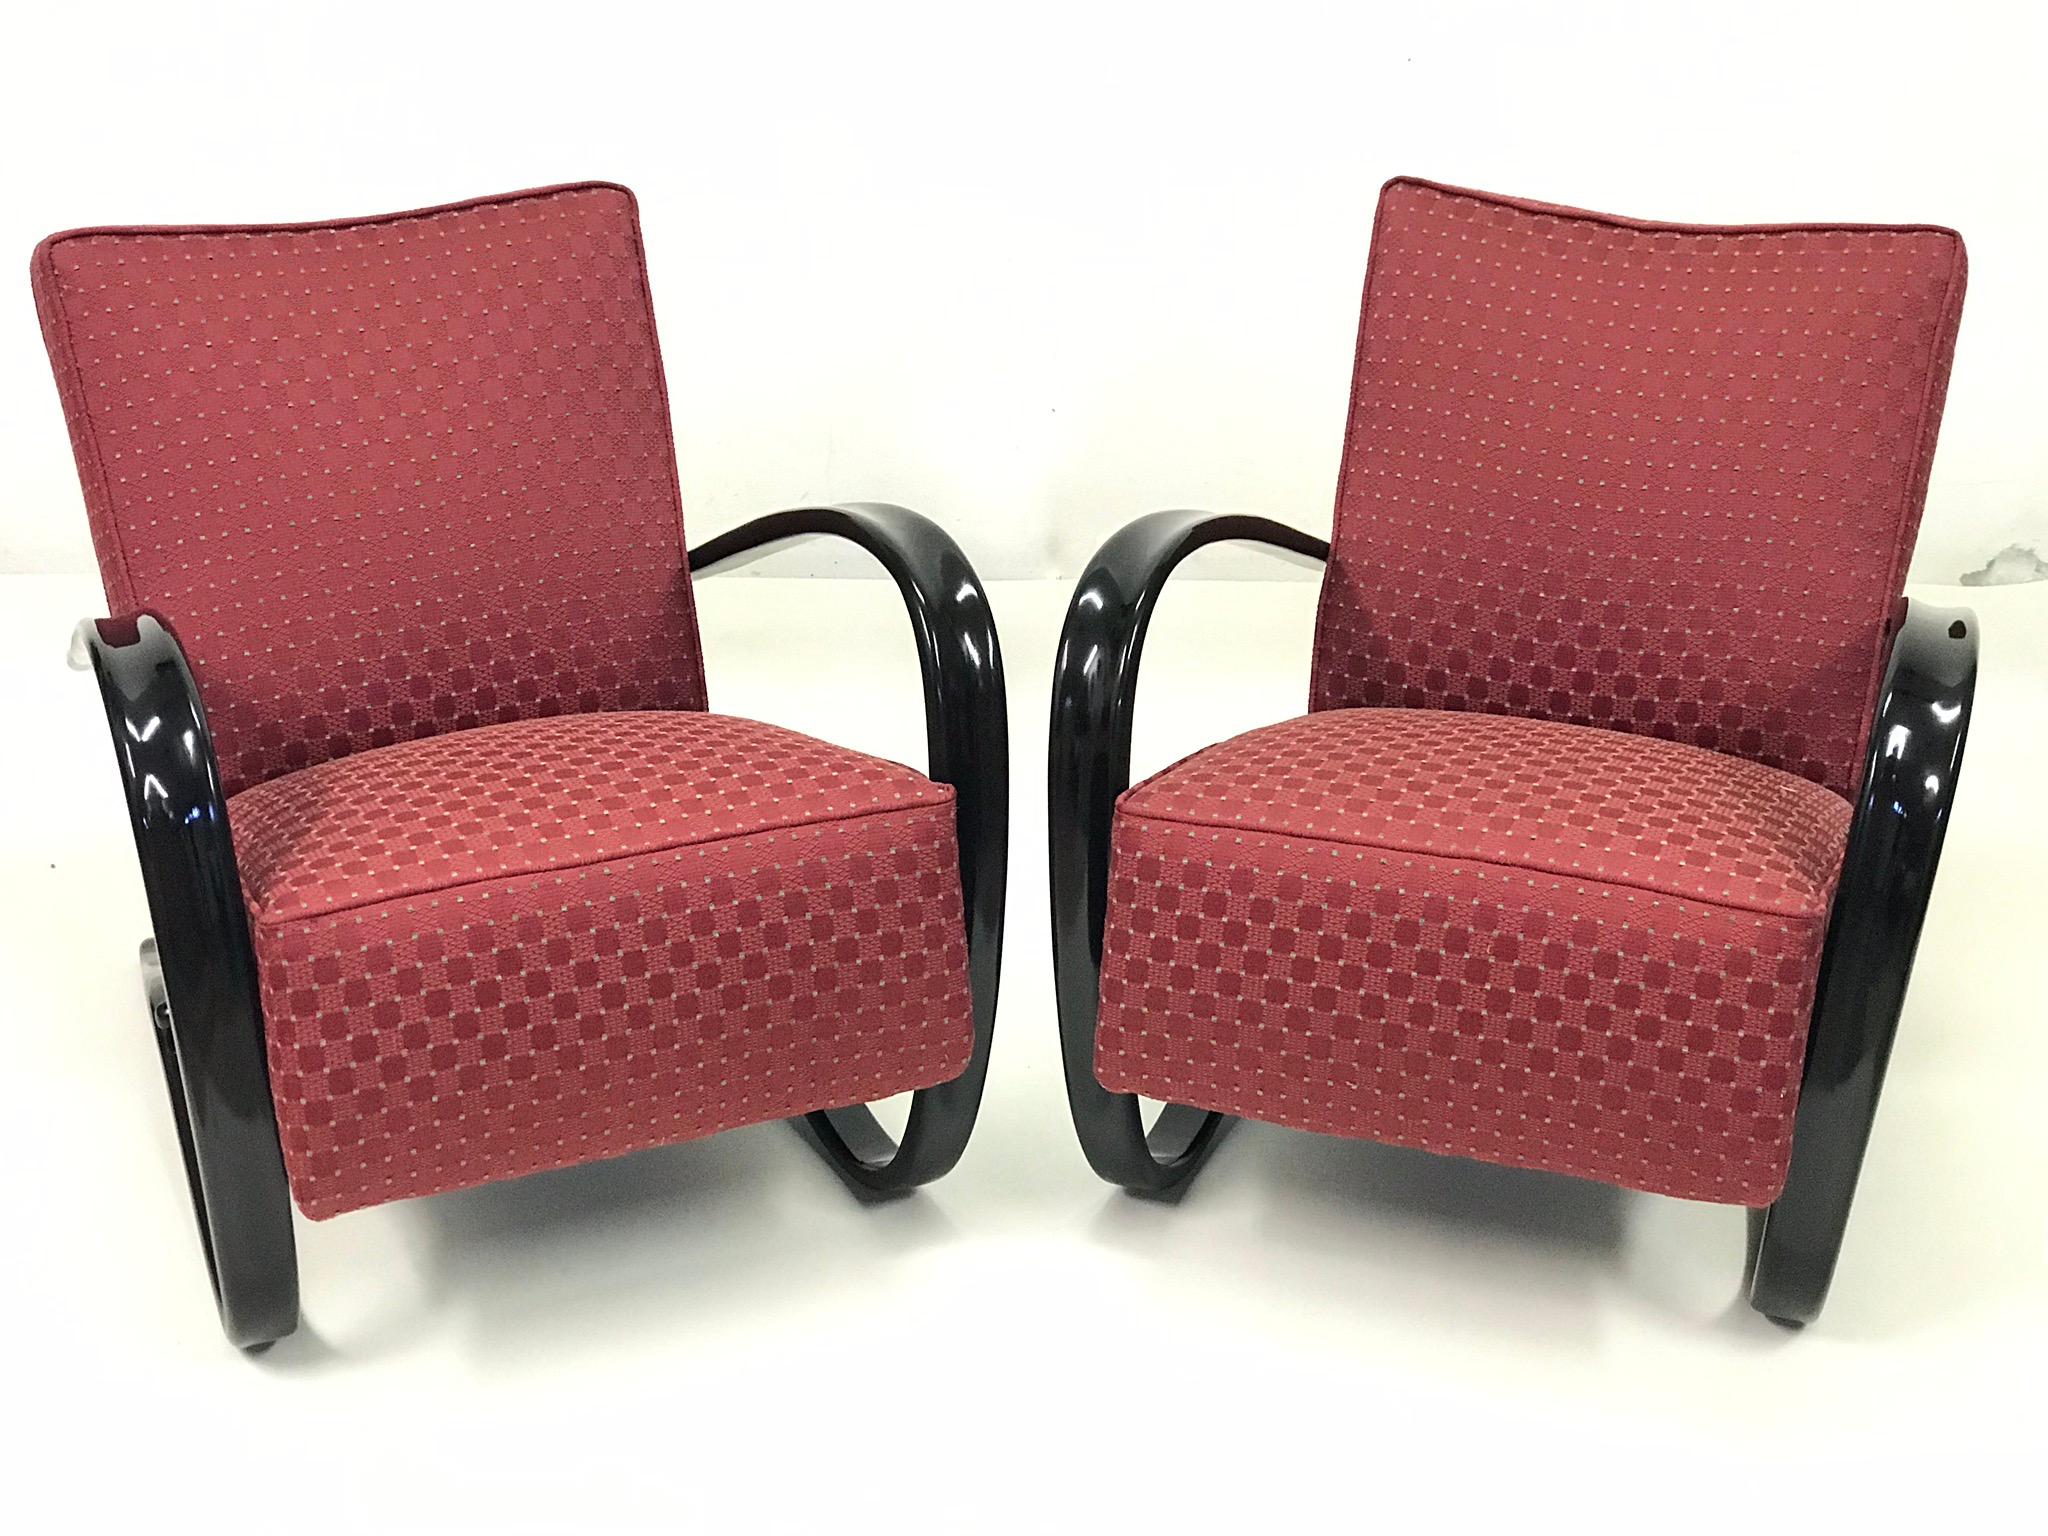 Art Deco Pair of Armchairs by J. Halabala 1930, Model H-269 For Sale